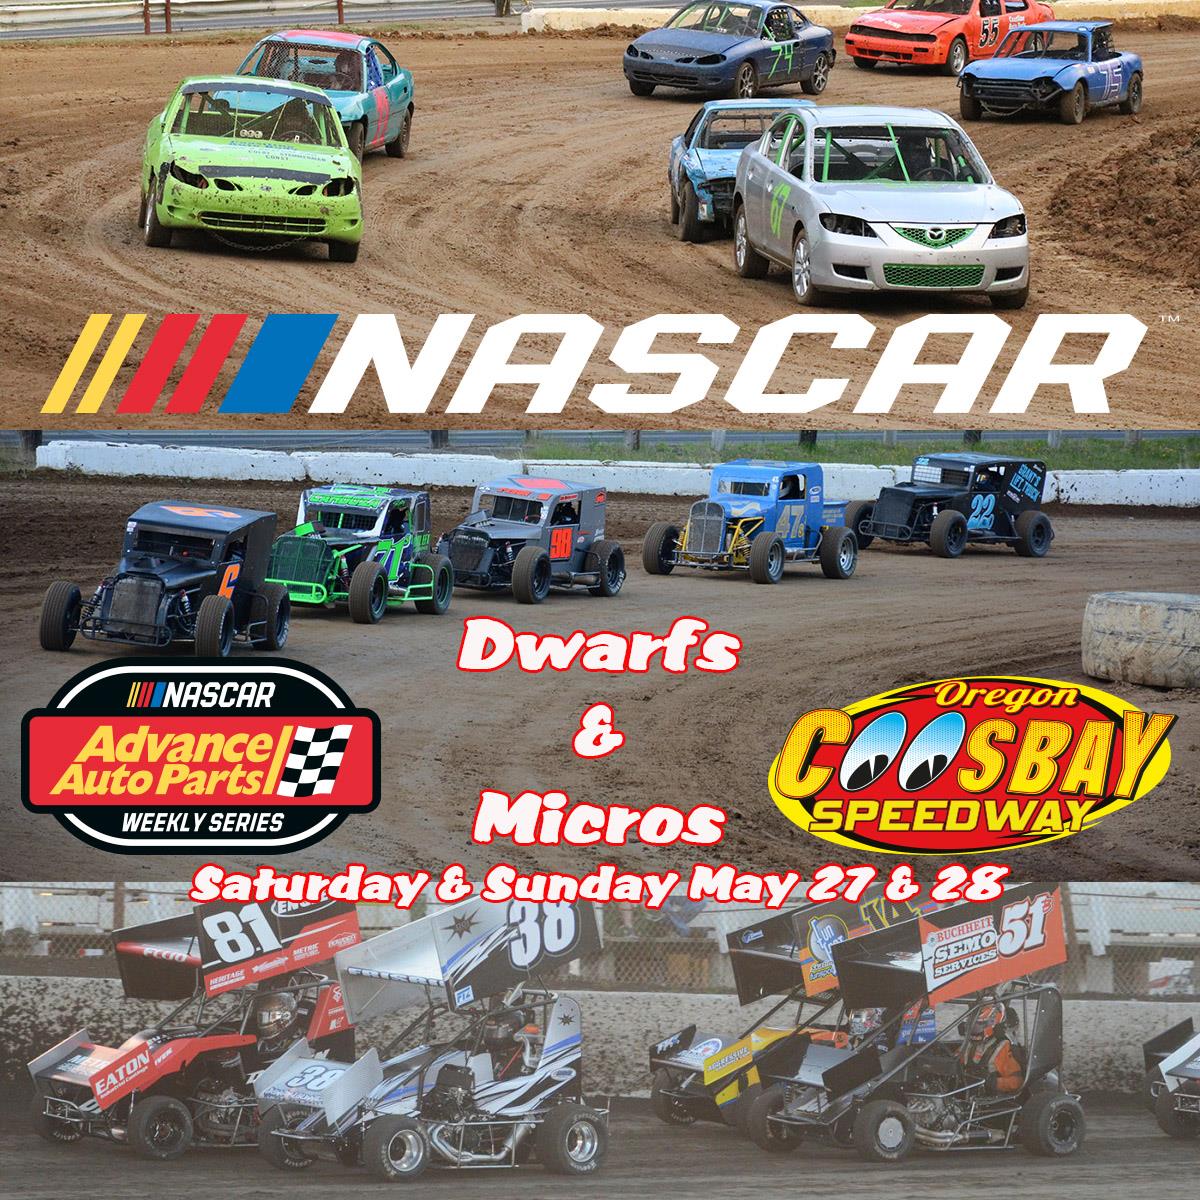 Dwarfs &amp; Micros Two Days This Weekend May 27 &amp; 28